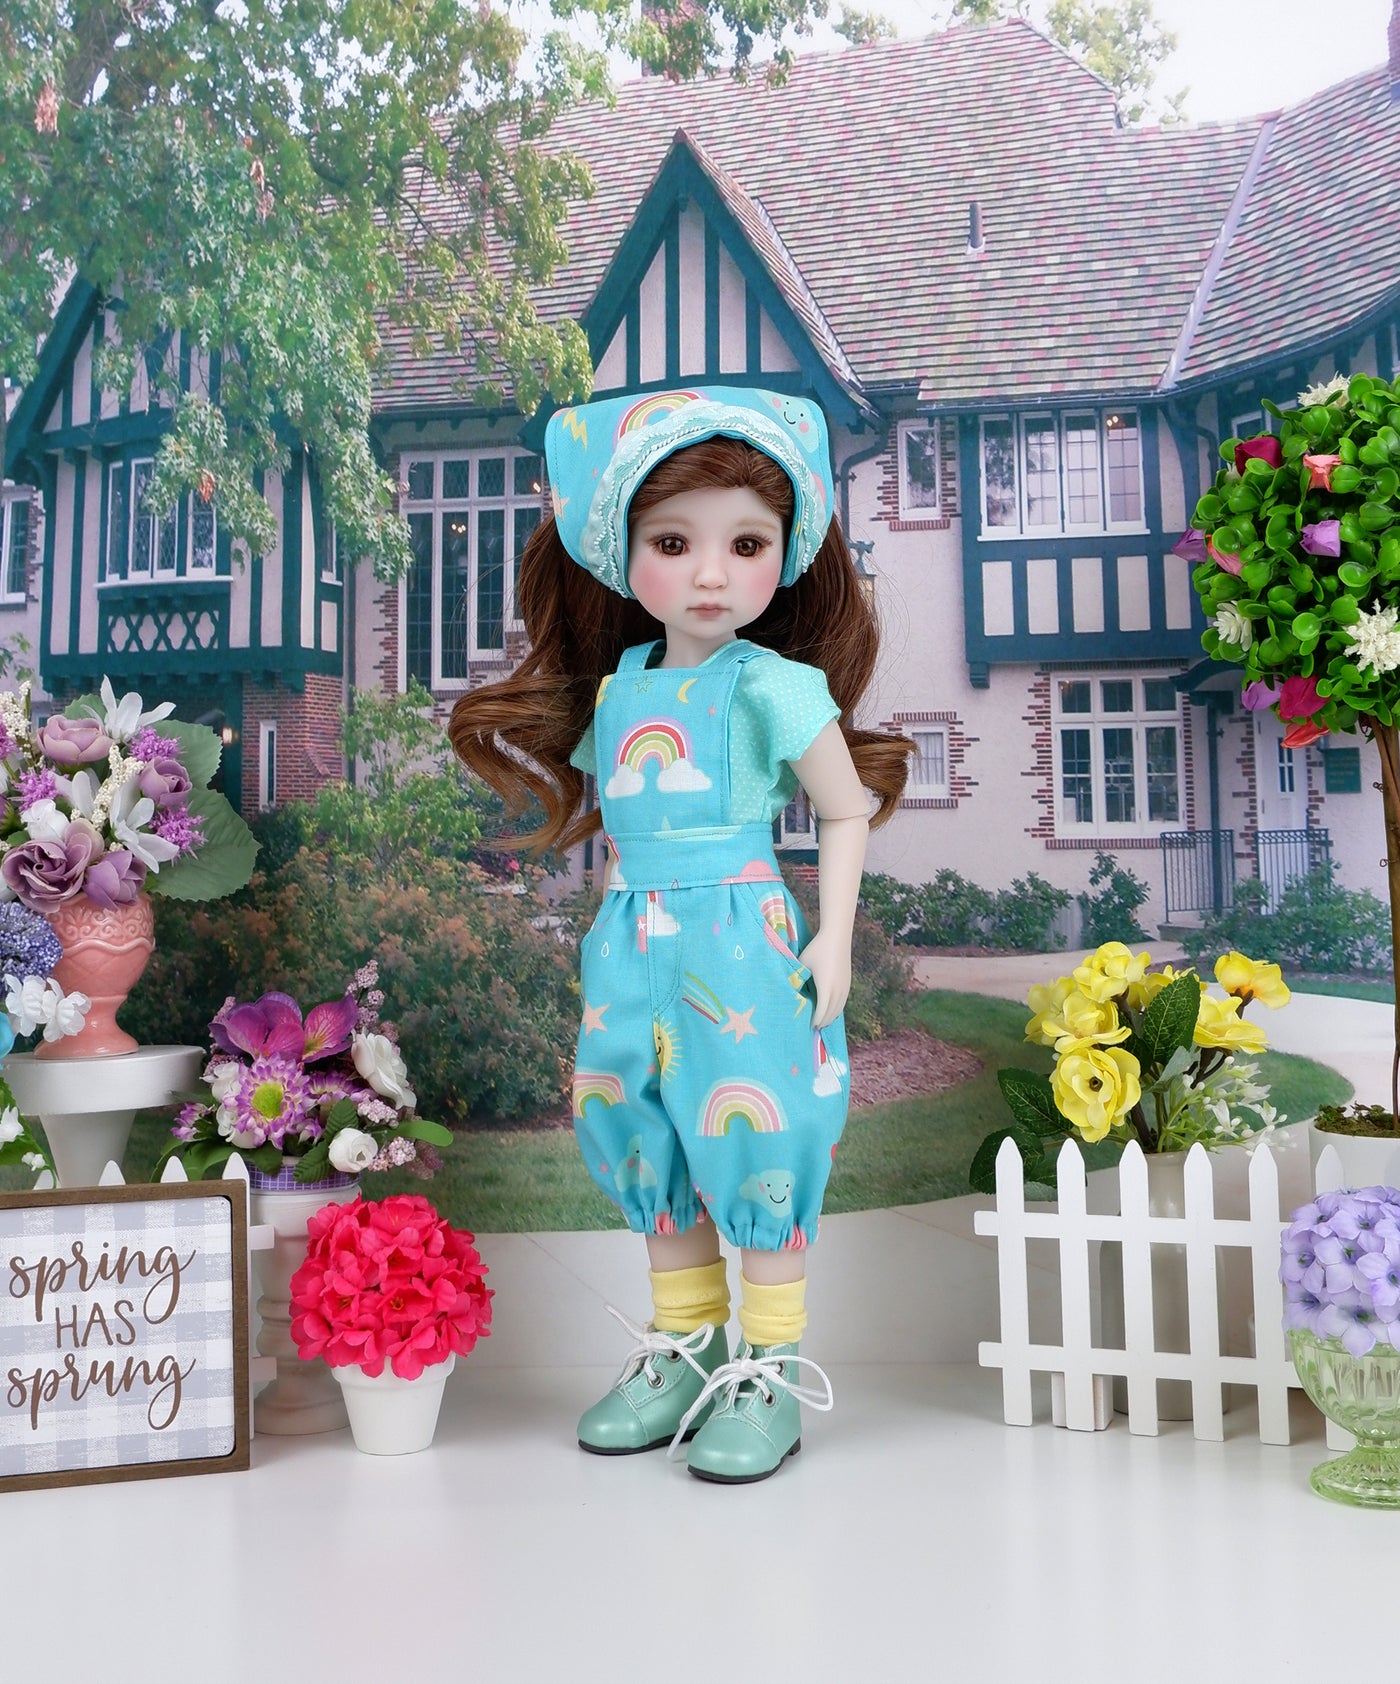 Spring Rainbows - shirt & overalls with boots for Ruby Red Fashion Friends doll